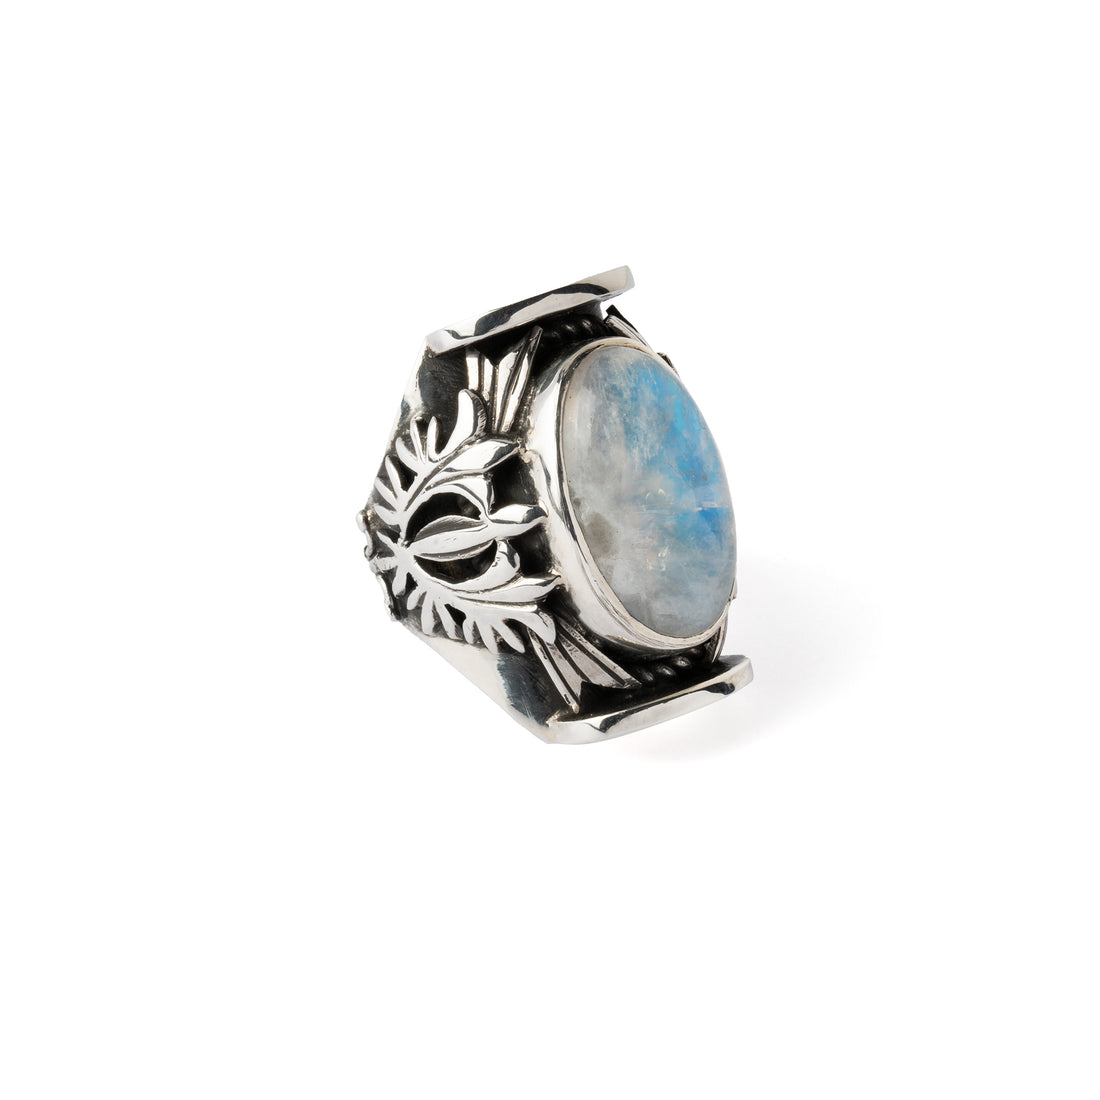 Hallmarked Silver Saddle Ring with Moonstone